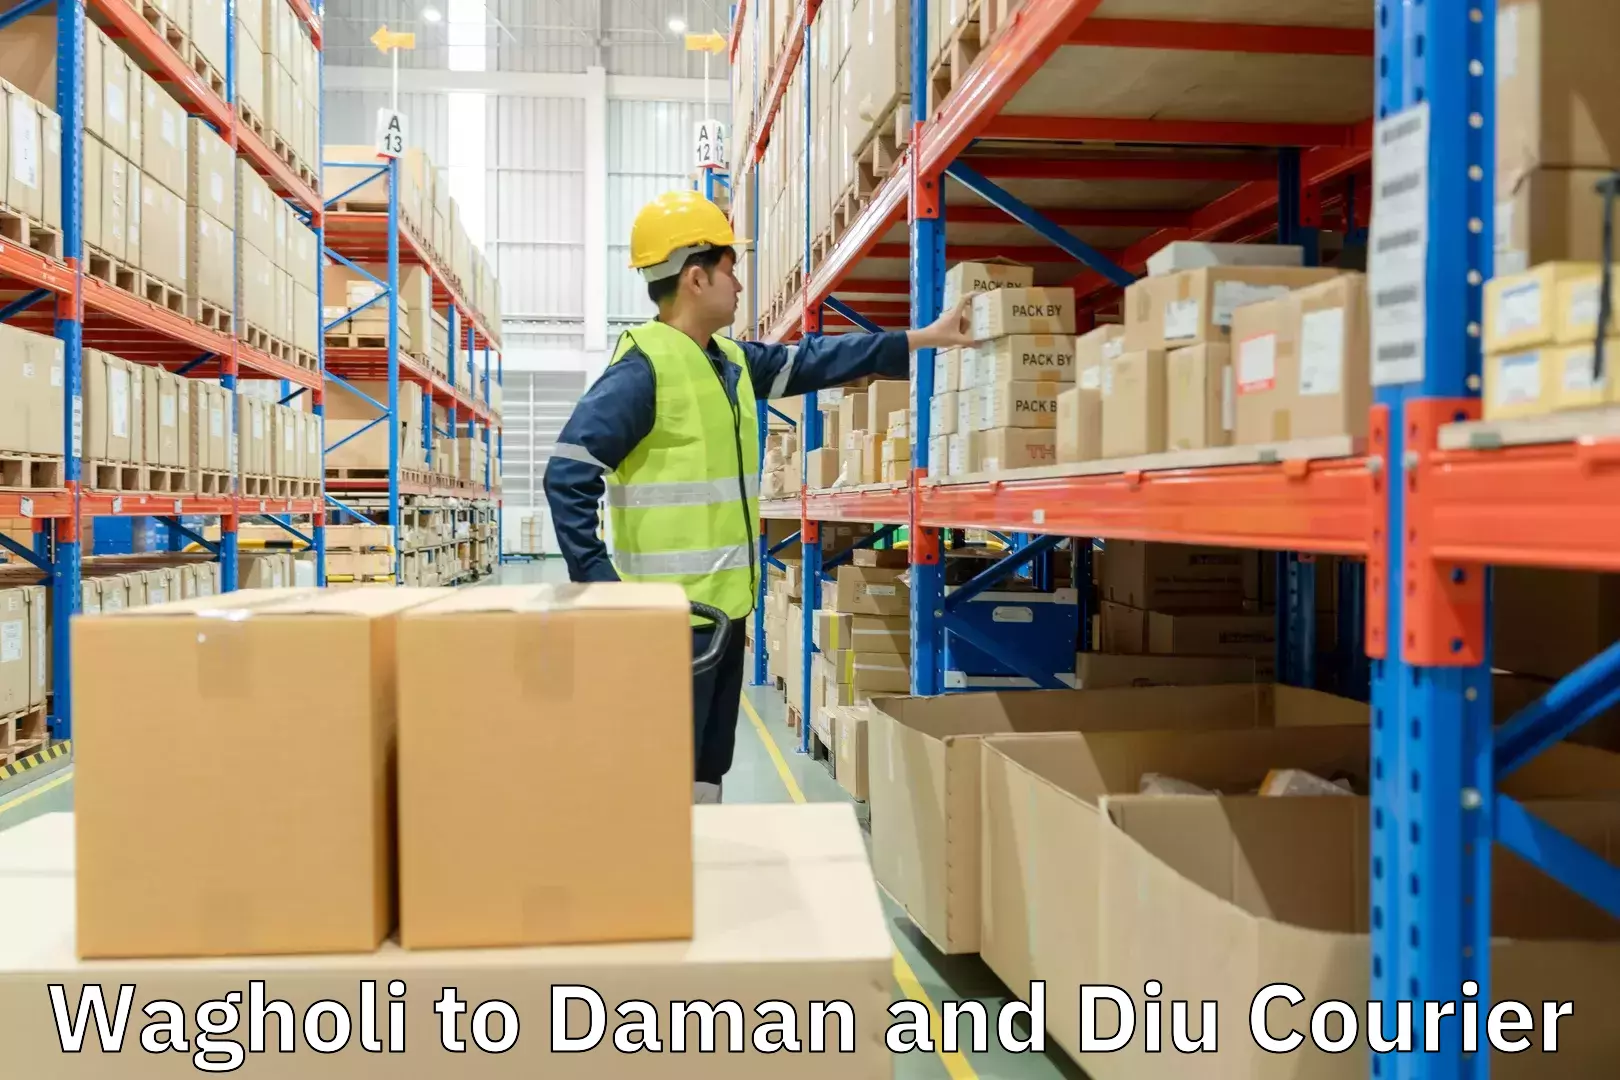 Flexible delivery schedules Wagholi to Daman and Diu